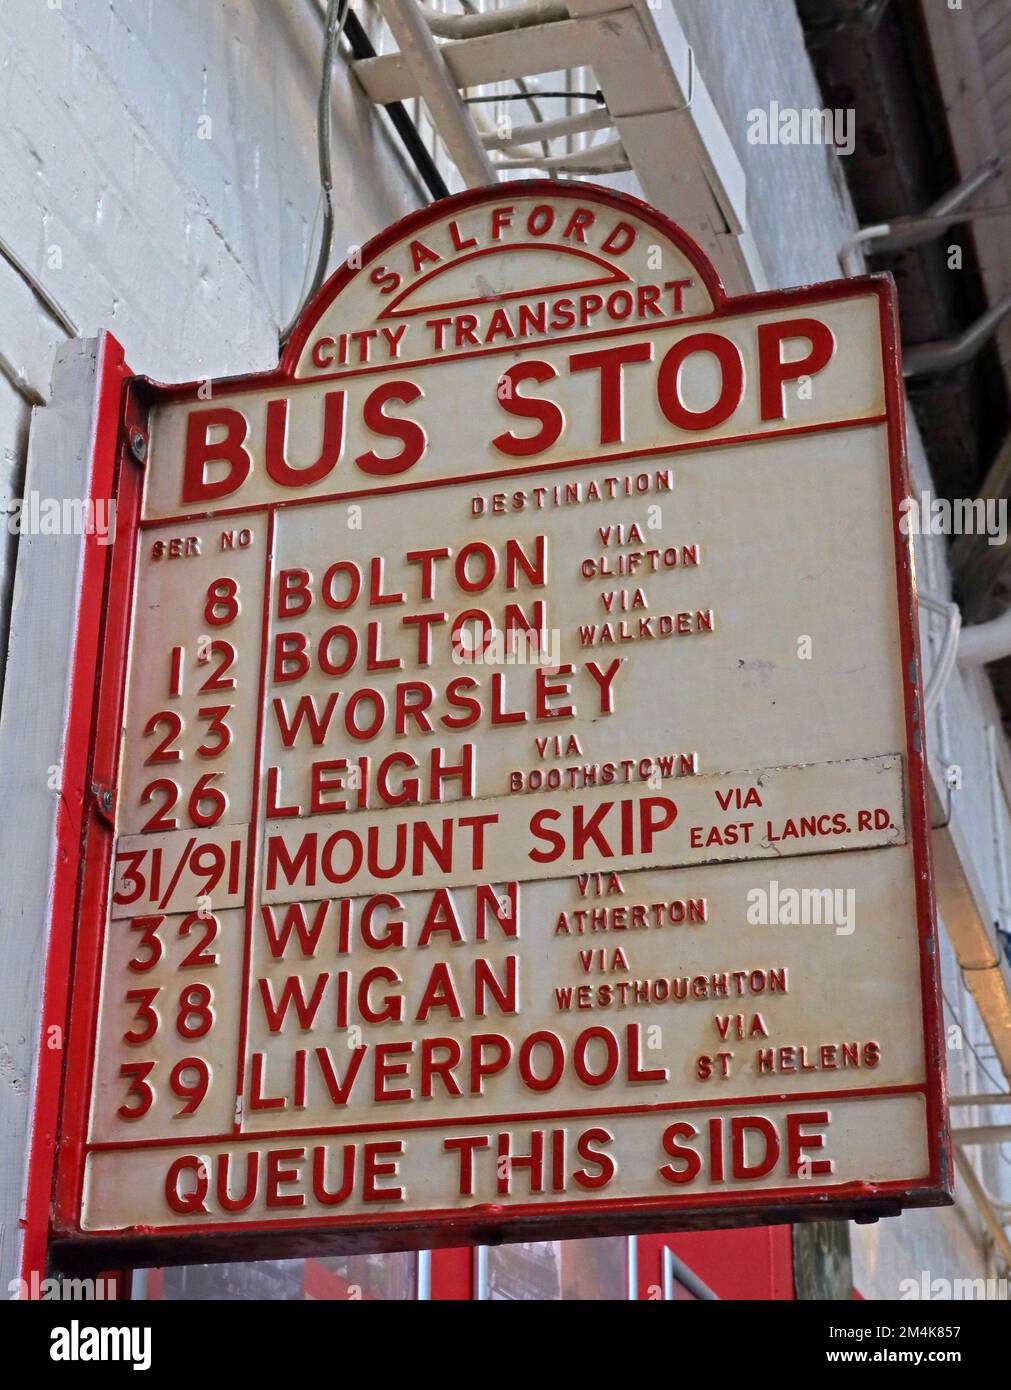 Salford City Transport, bus stop, destinations, Queue this side, Bolton, Worsley, Leigh, Mount Skip, Wigan , Liverpool Stock Photo